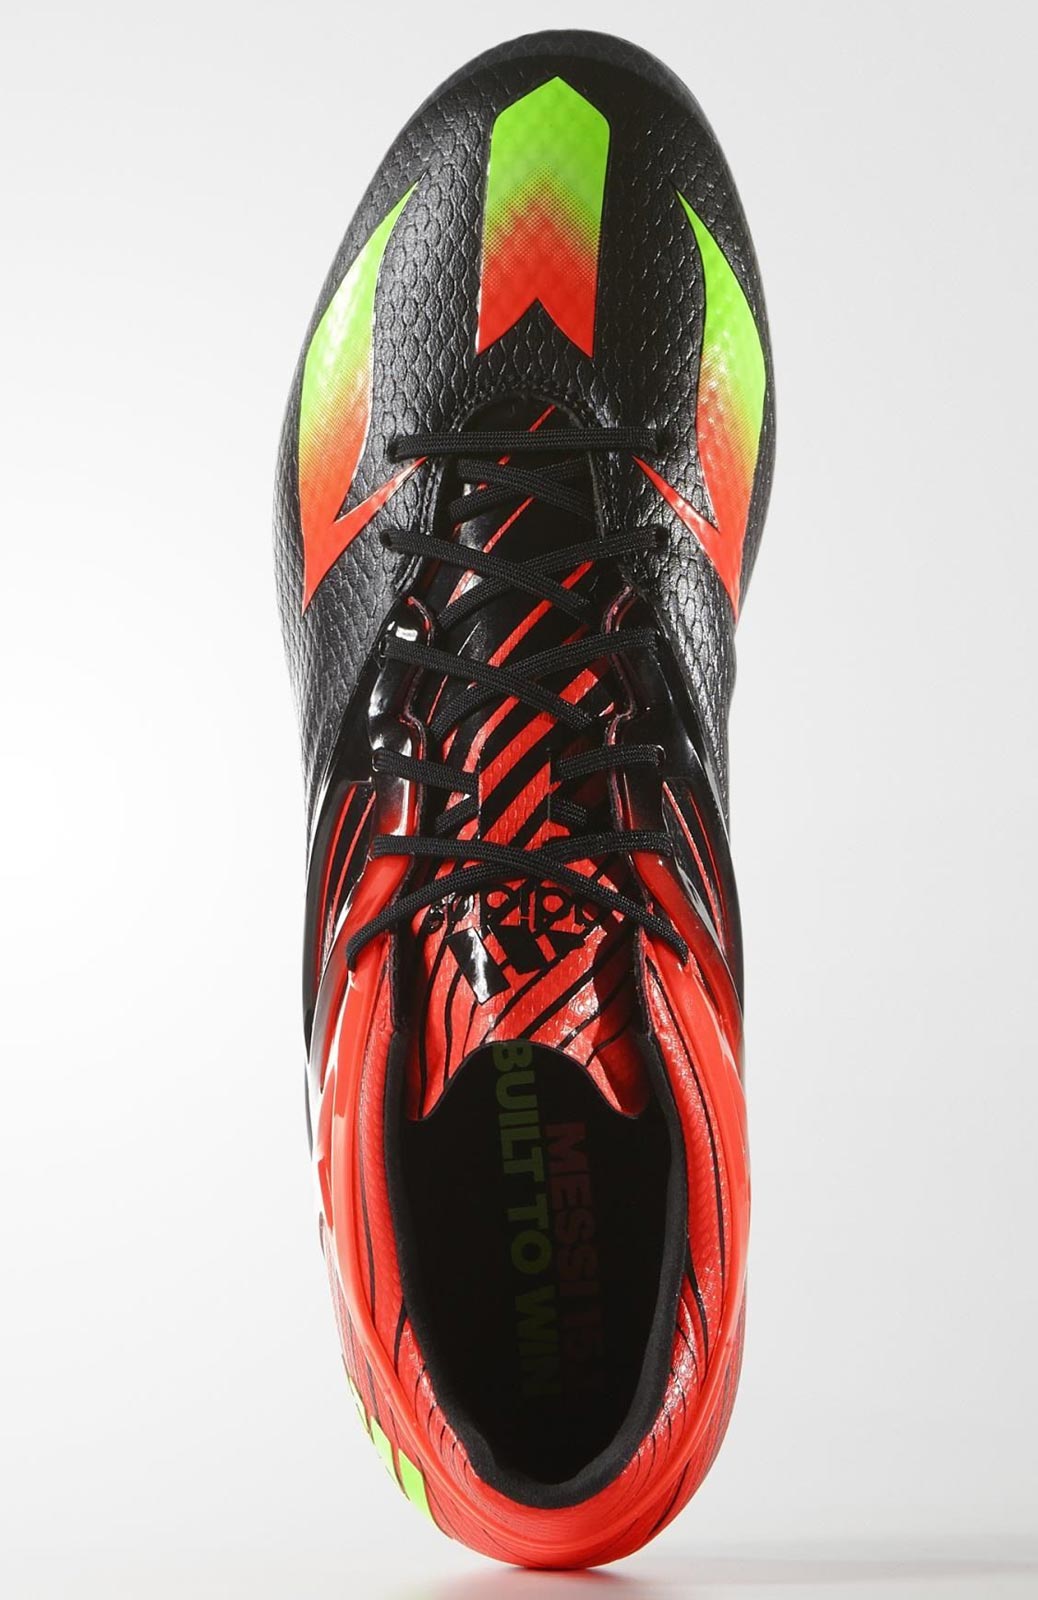 Striking Adidas Messi 2015-2016 Boots Released - Footy ...